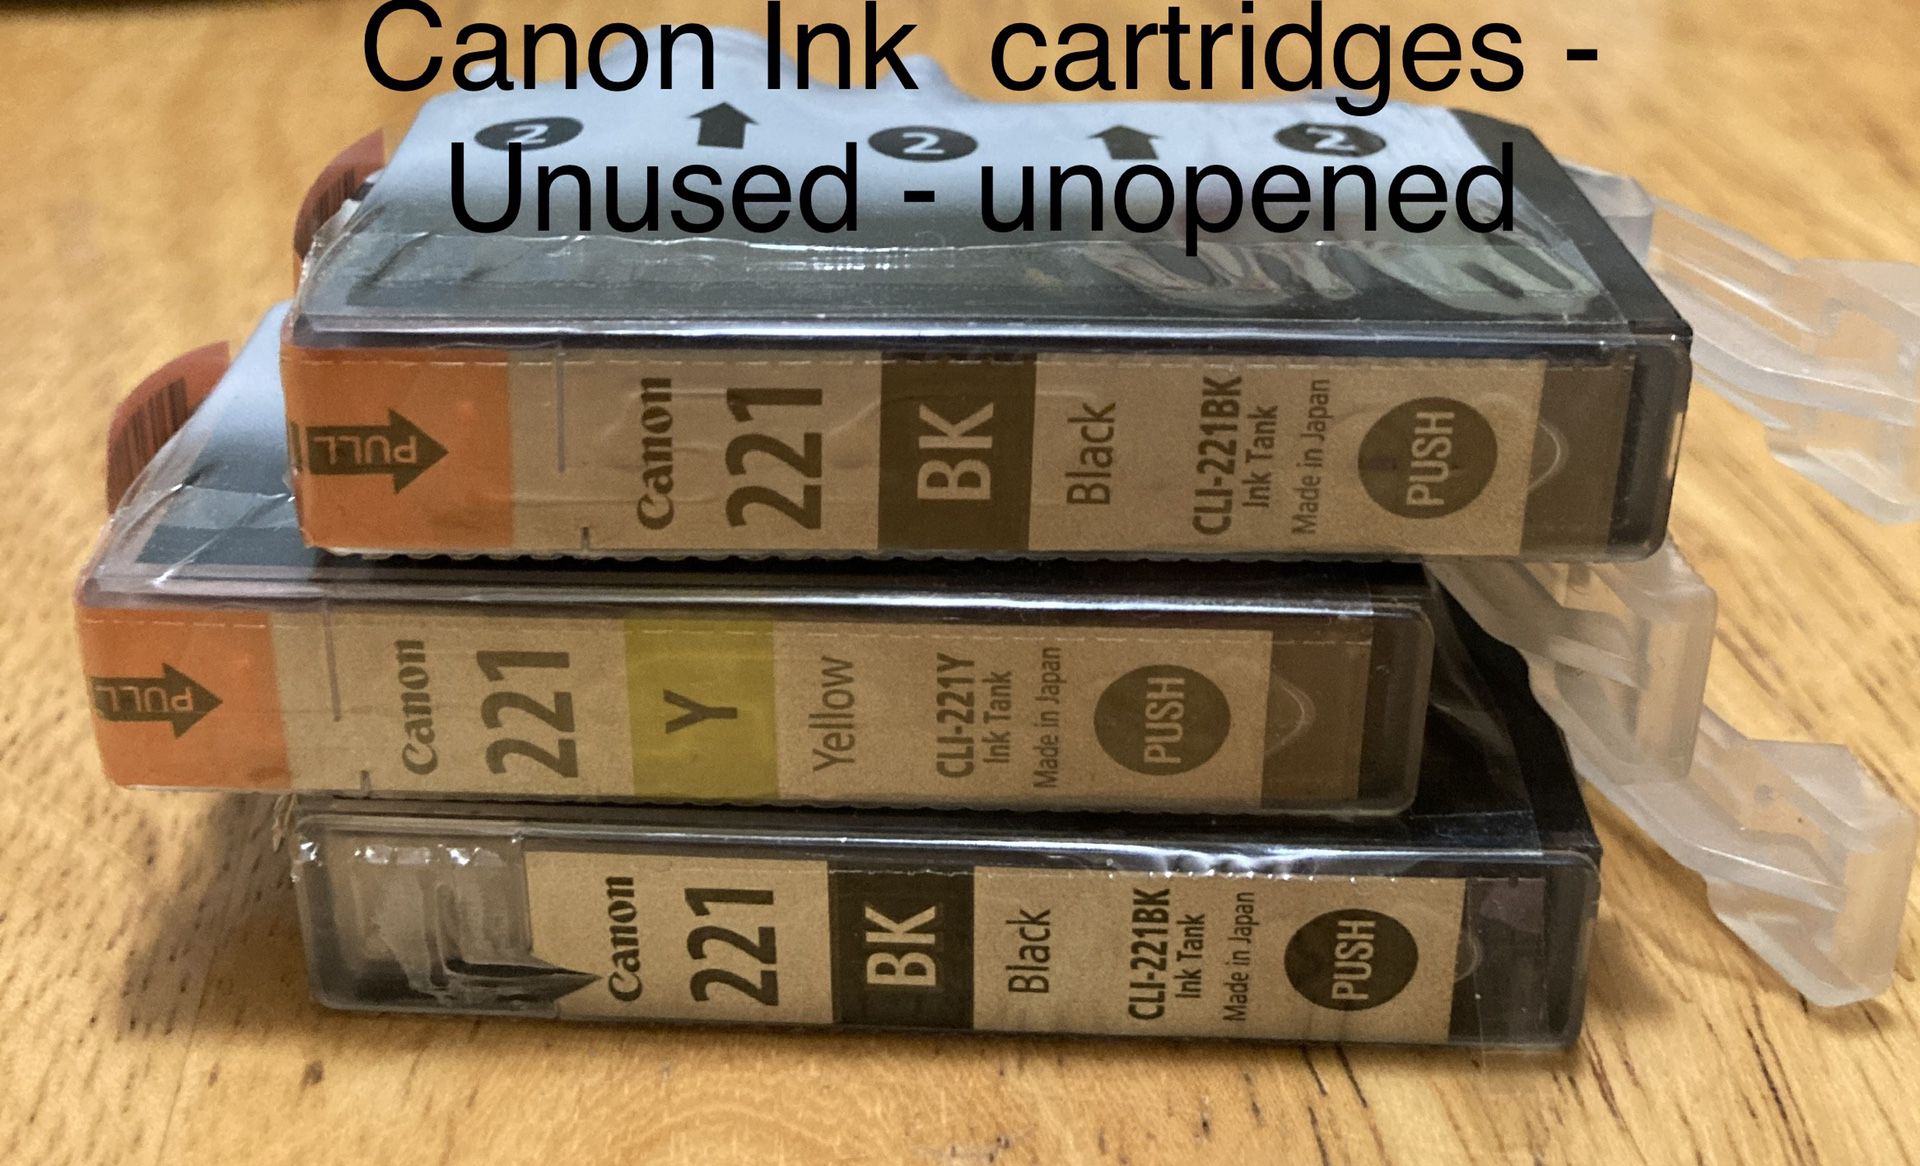 CANON INK CARTRIDGES